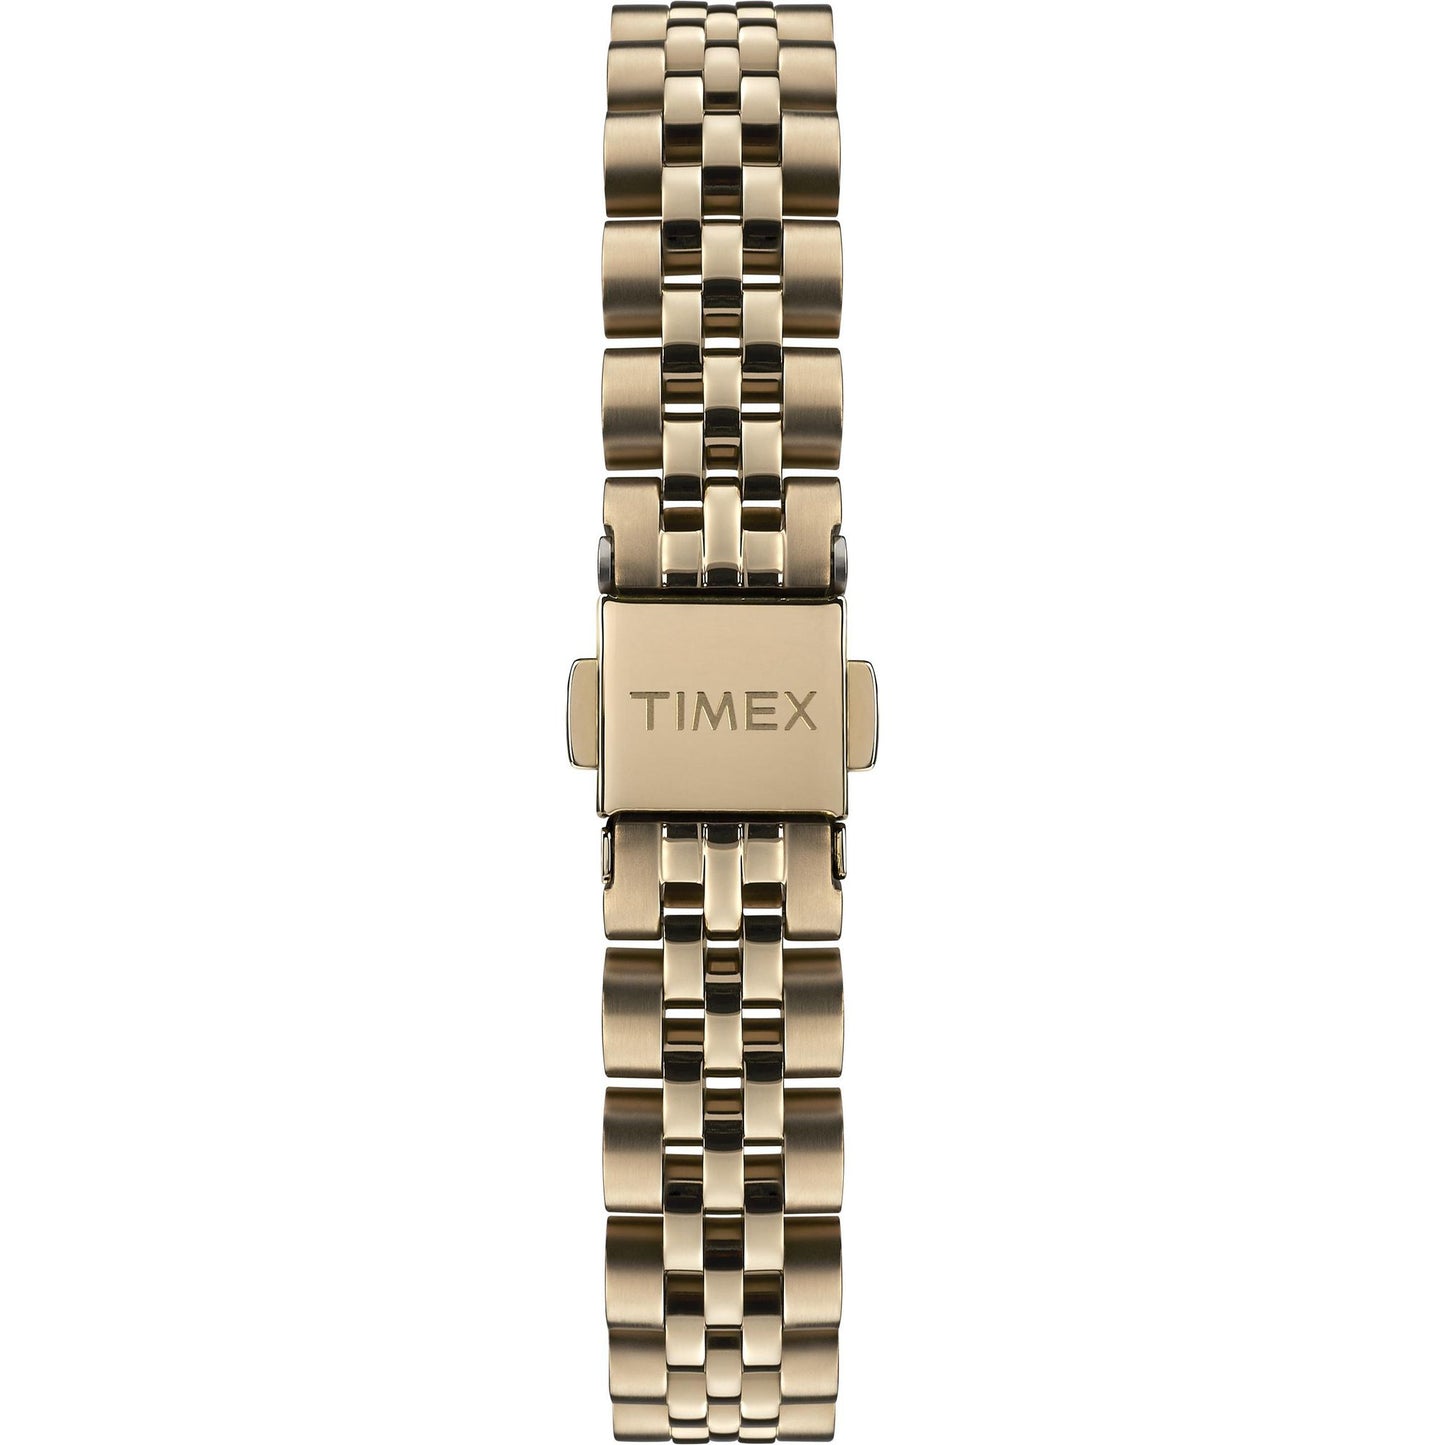 Timex Champagne Dial Analog Women Watch - TW2T88600